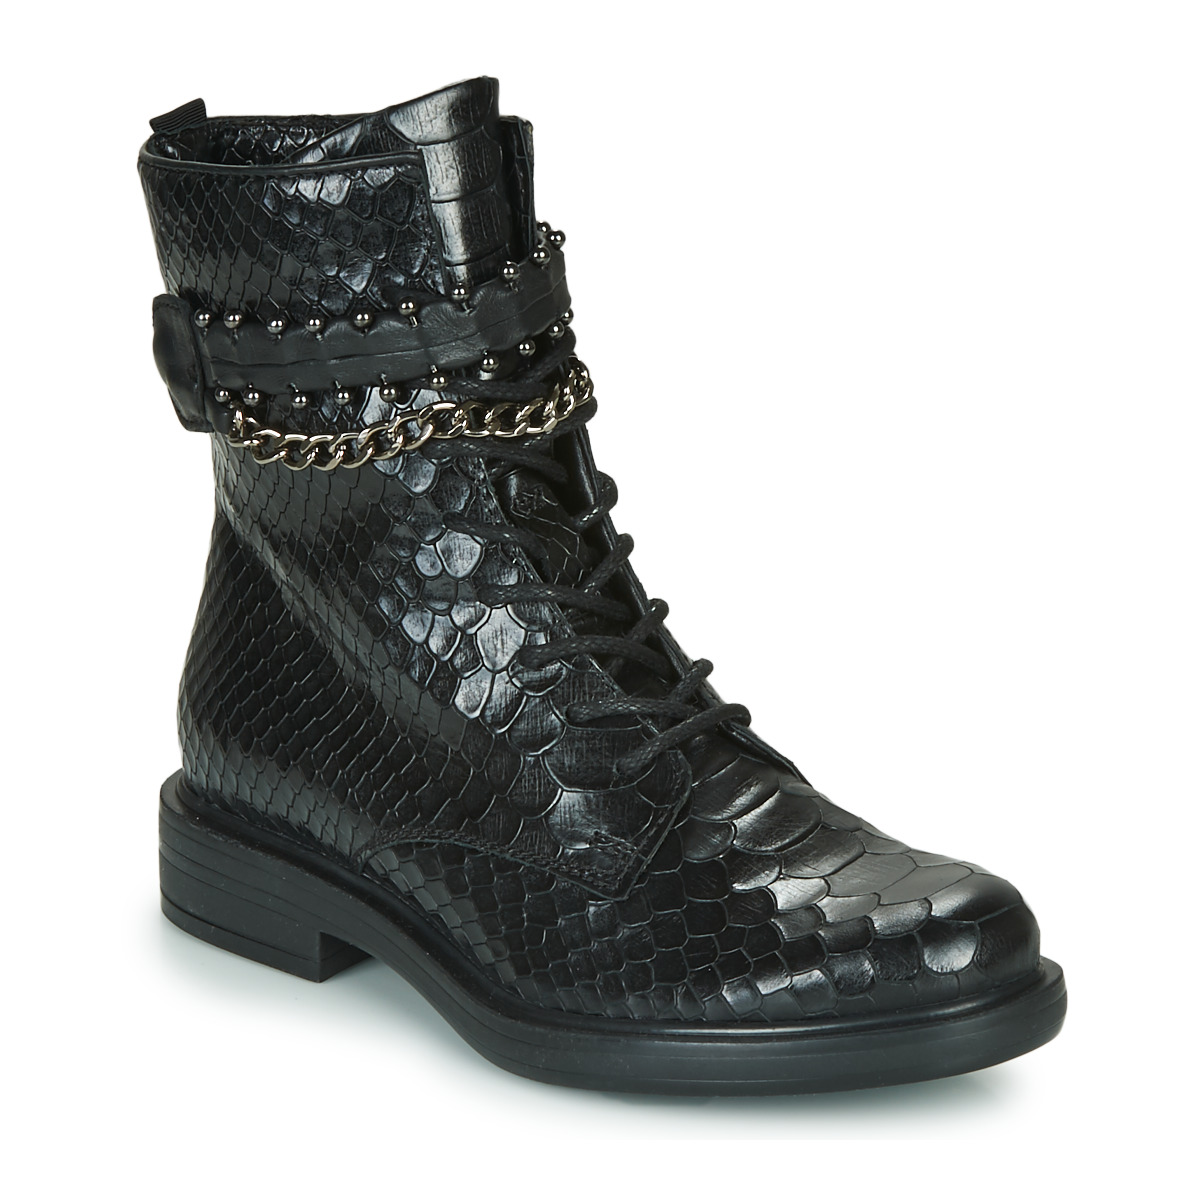 Chaussures Femme Boots Mjus CAFE SNAKE 